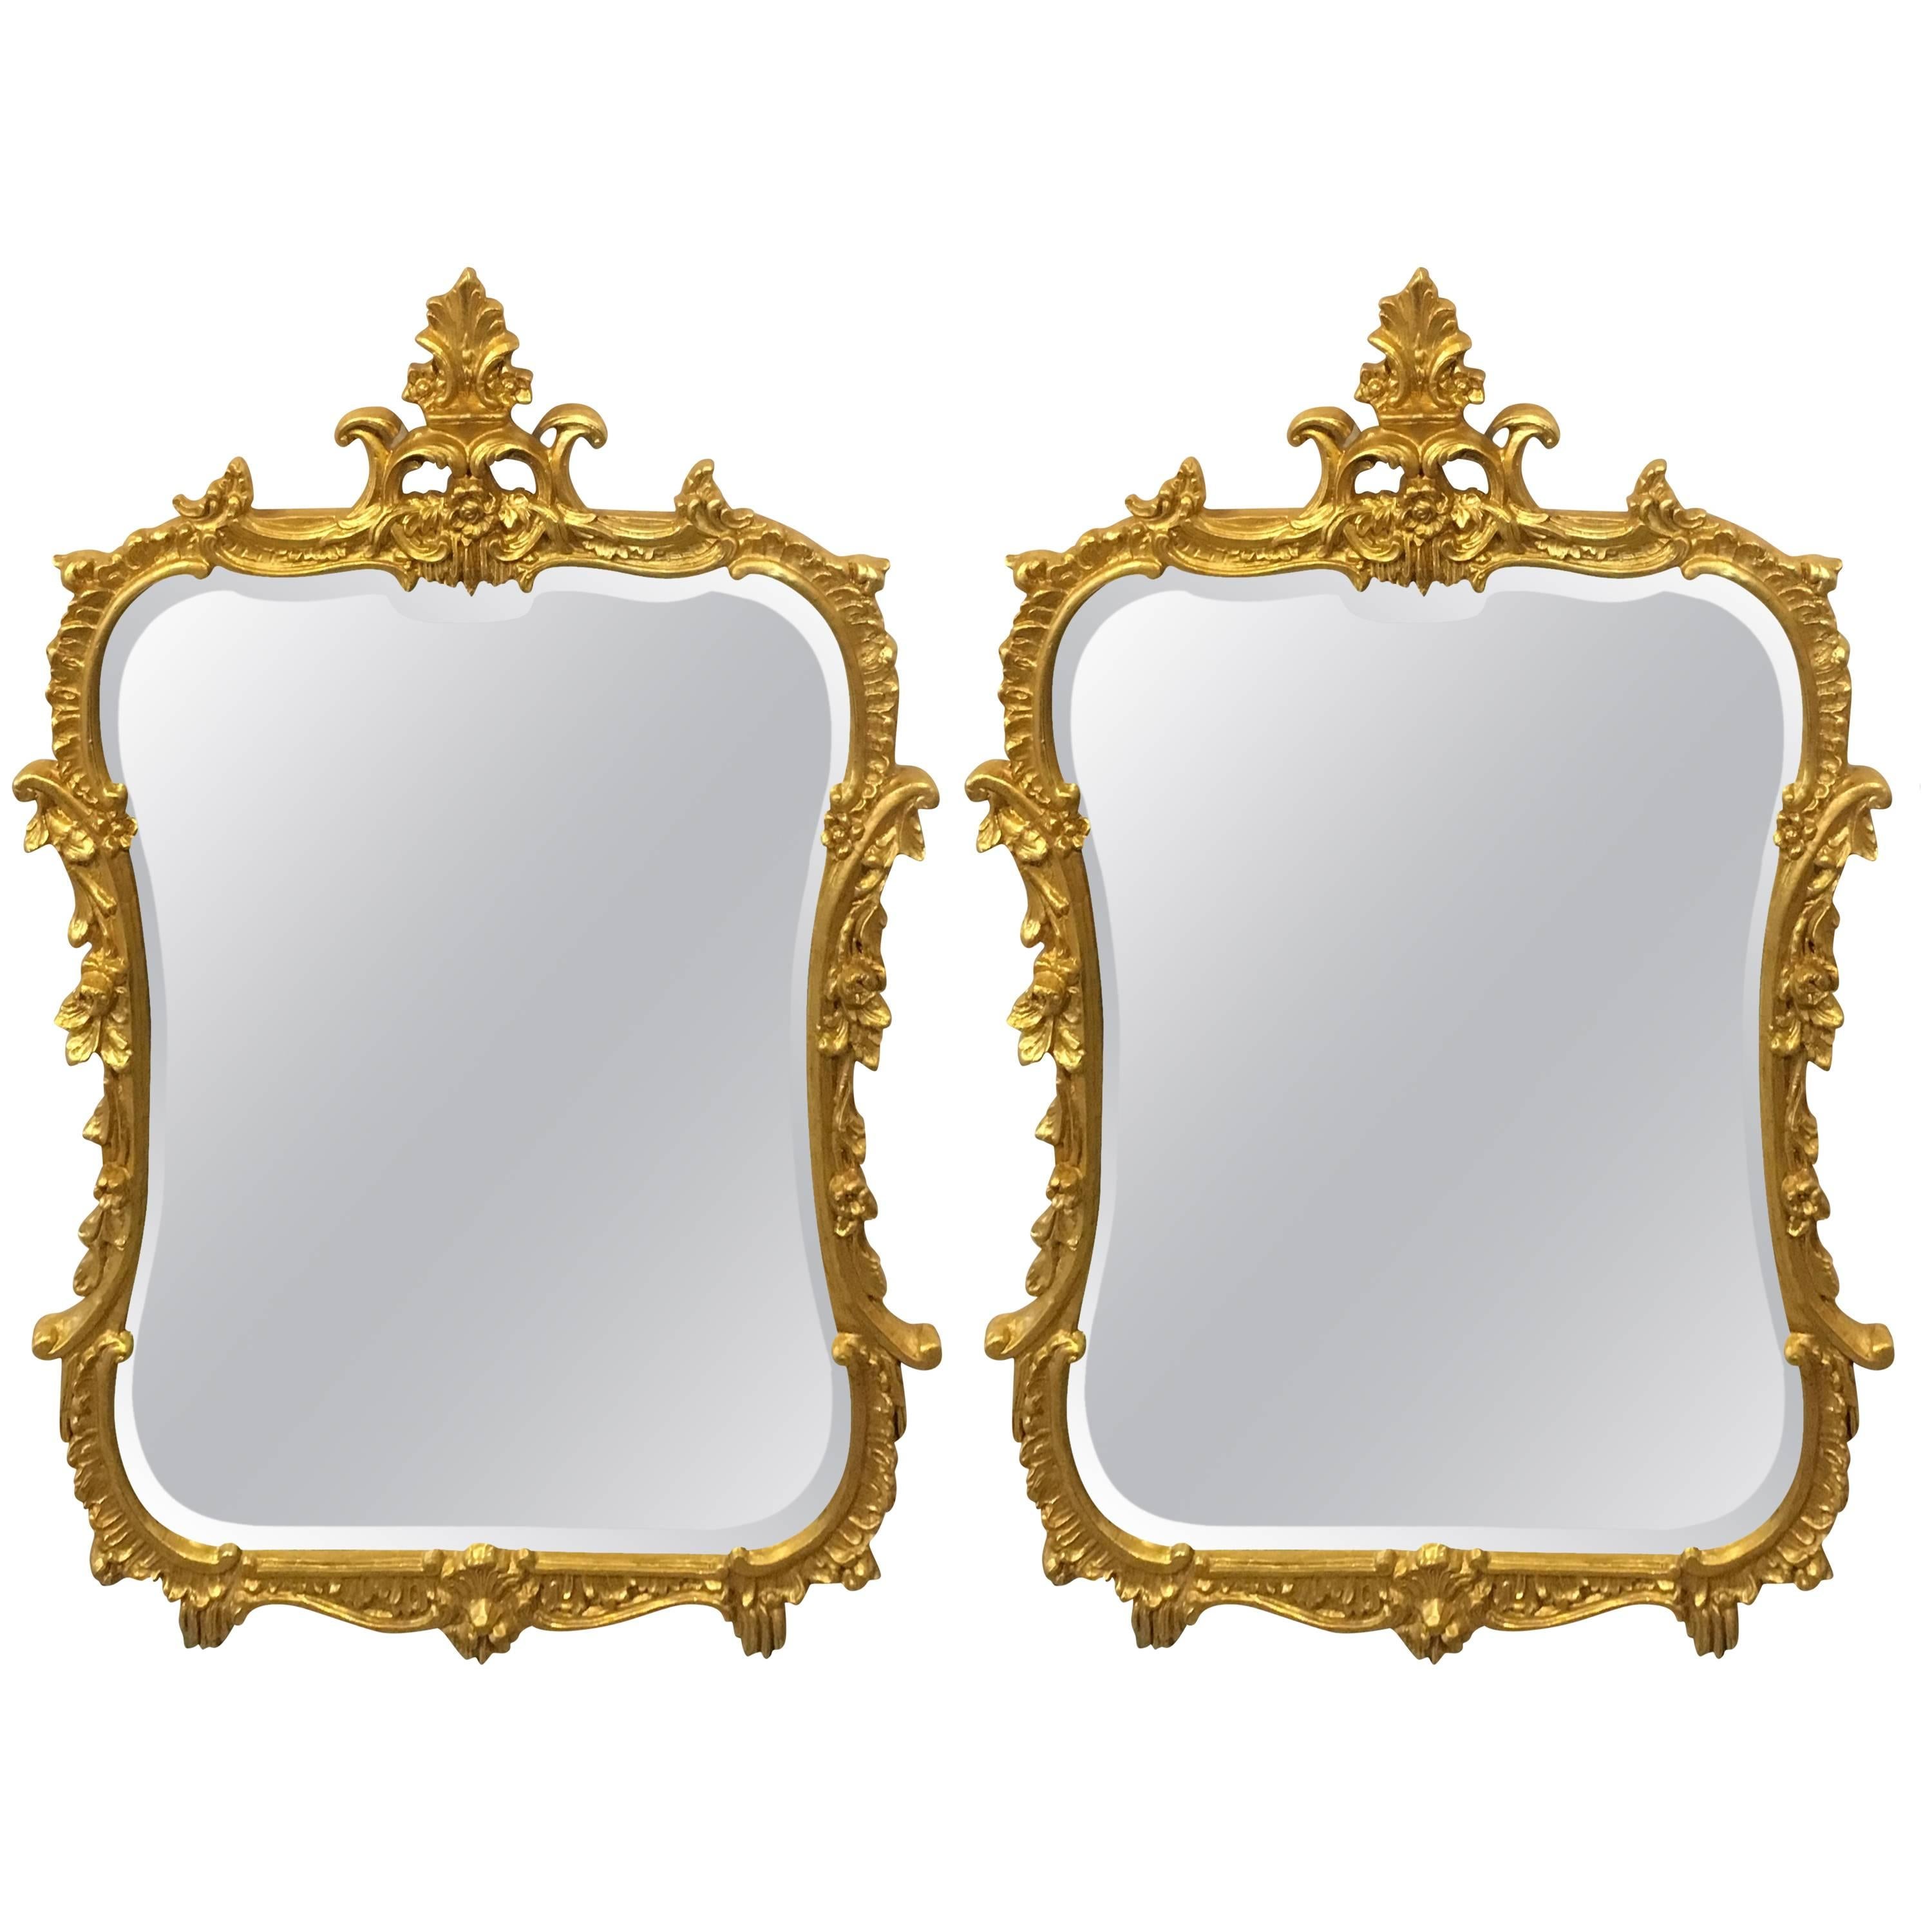 Pair of Chippendale Fashioned Console Mirrors by Friedman Bros